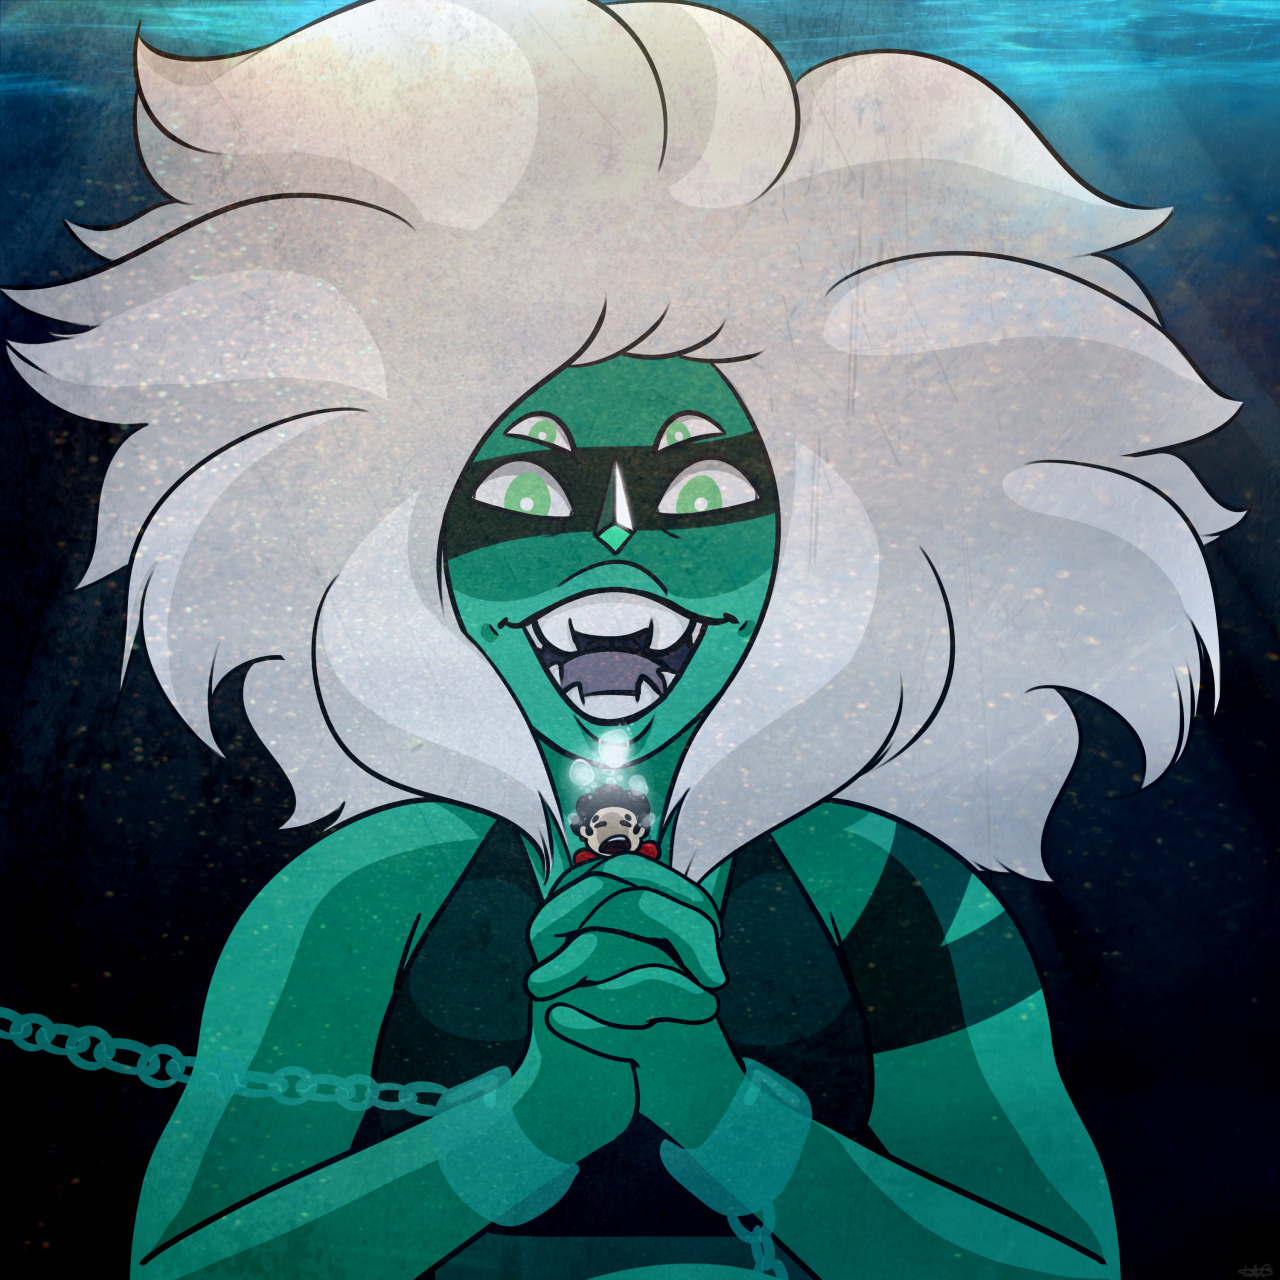 “Gotcha
”
l really wanted to draw Malachite after the newest episode